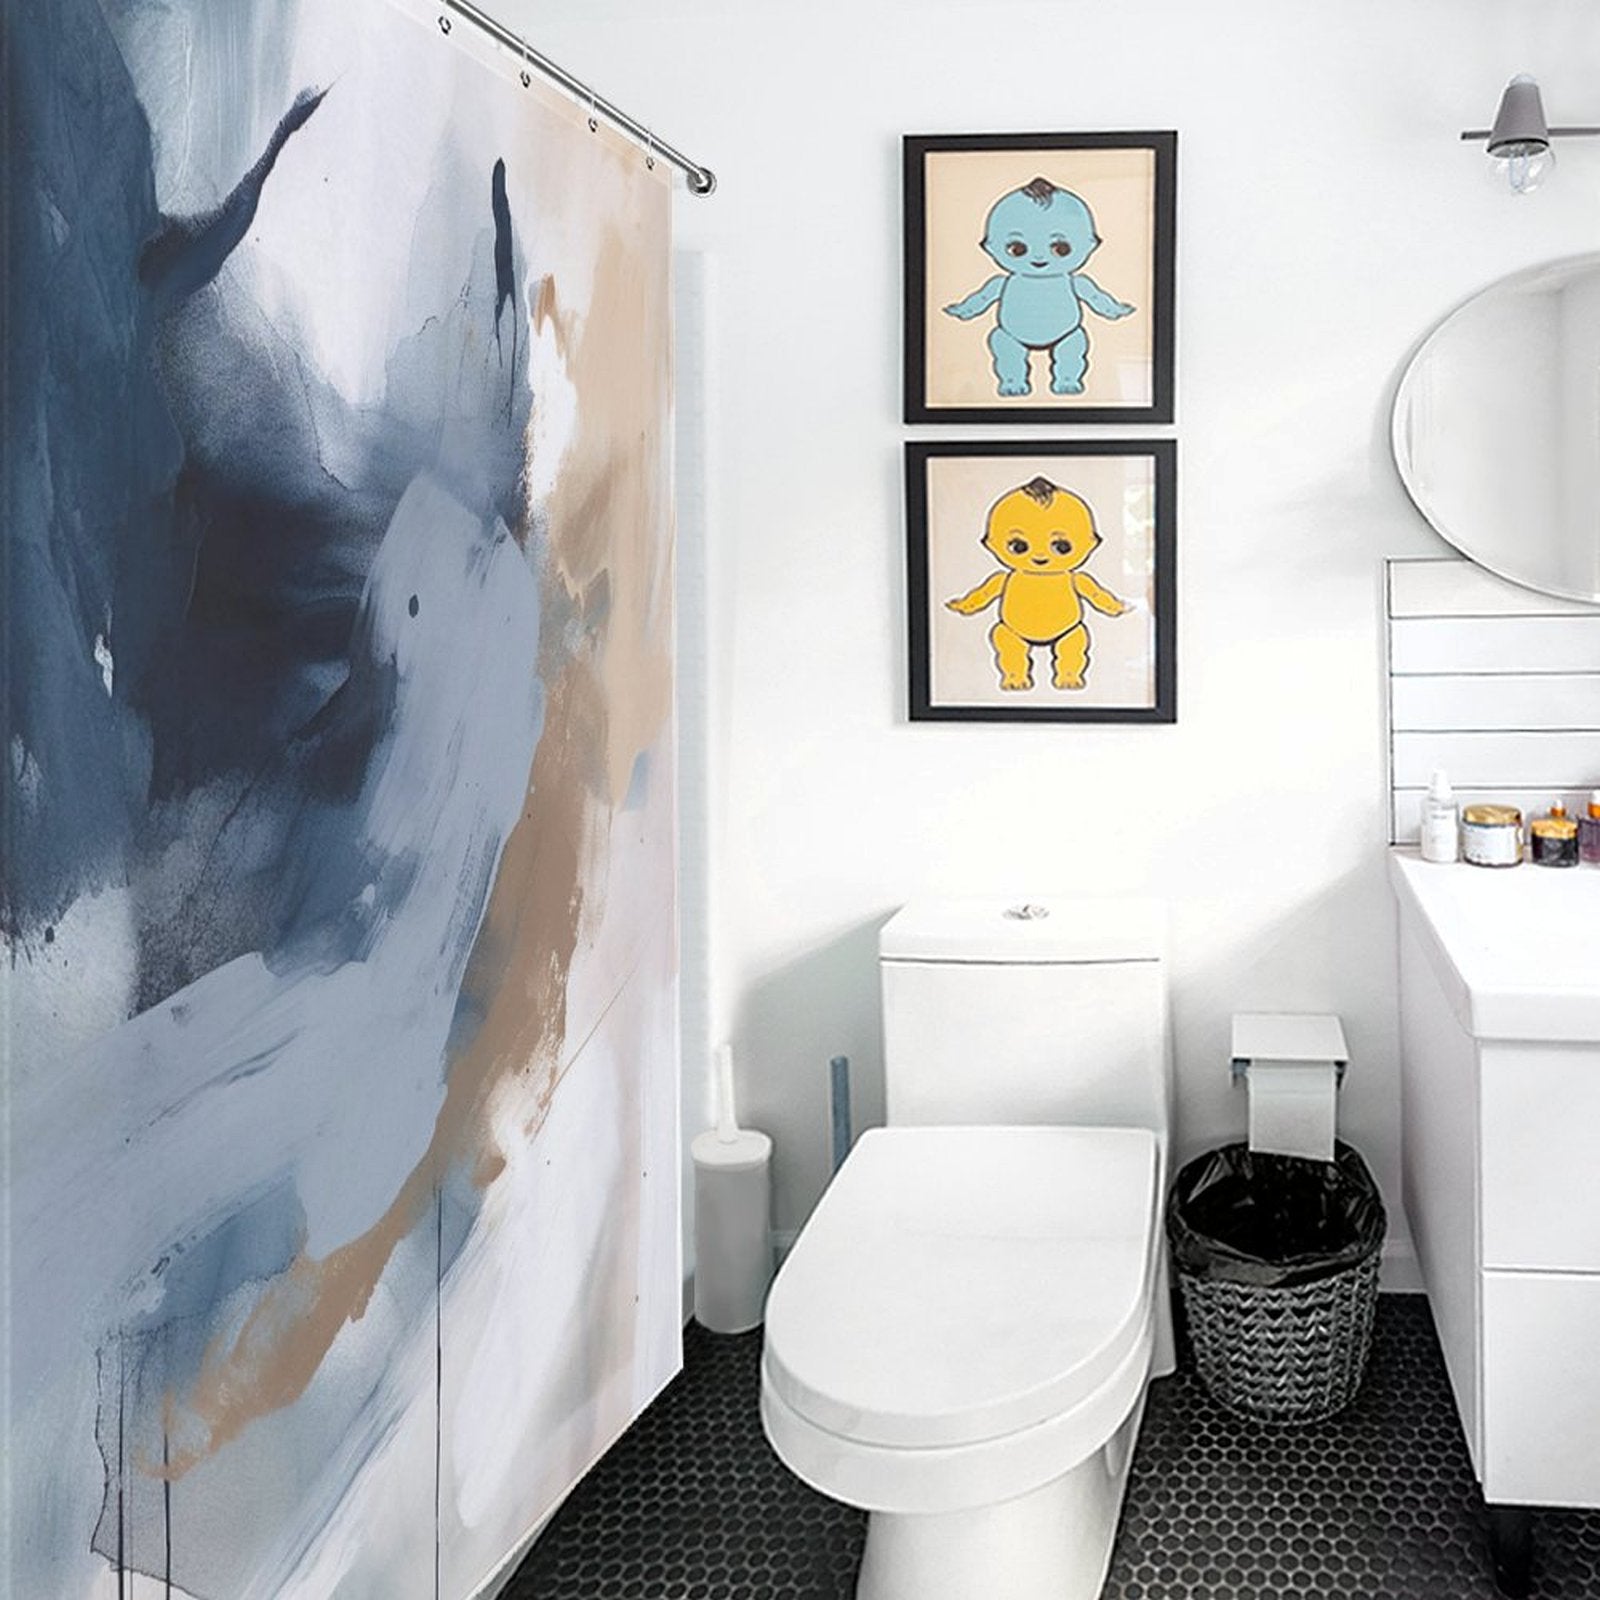 A bathroom with a white toilet, sink, Modern Wall Art Oil Painting Navy Blue Abstract Shower Curtain-Cottoncat by Cotton Cat, and two framed pictures of cartoon characters on the wall.